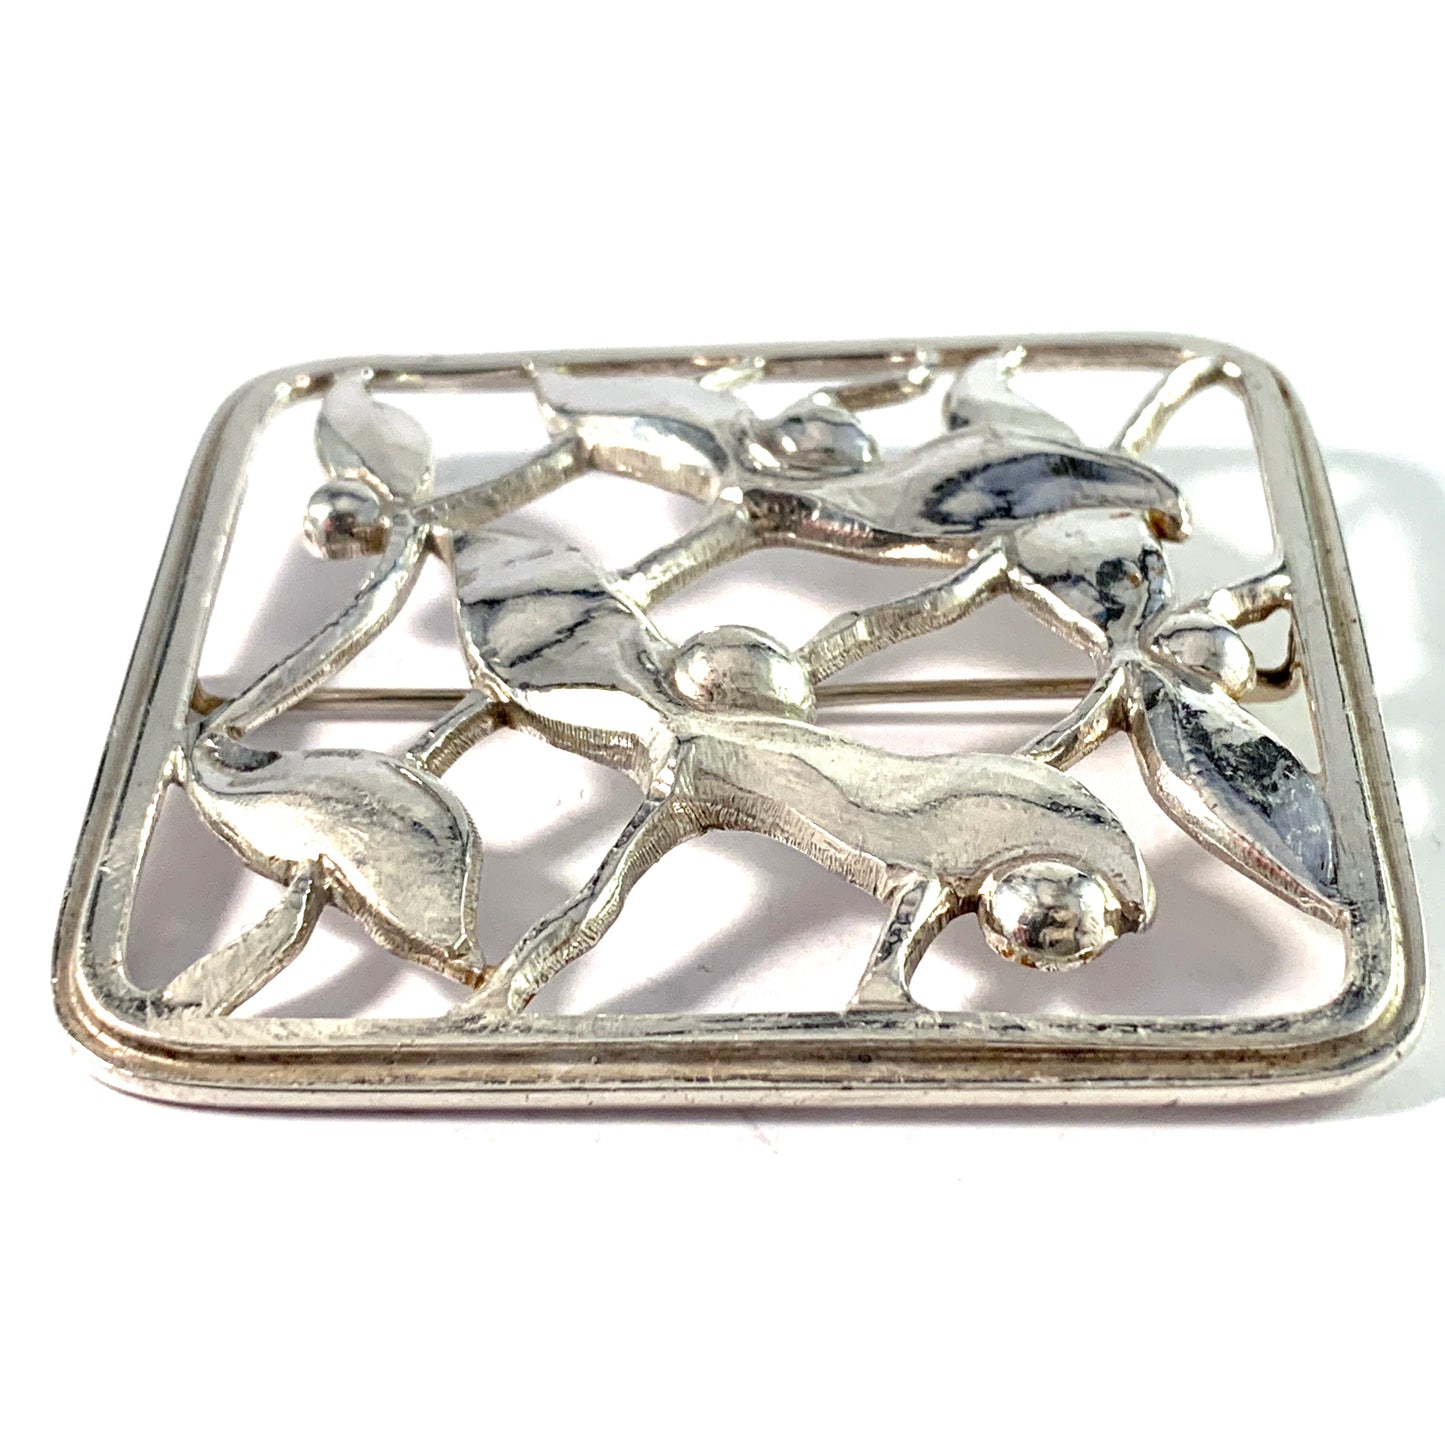 Svend Weihrauch for F. Hingelberg, Denmark 1930s. Sterling Silver Large Brooch.